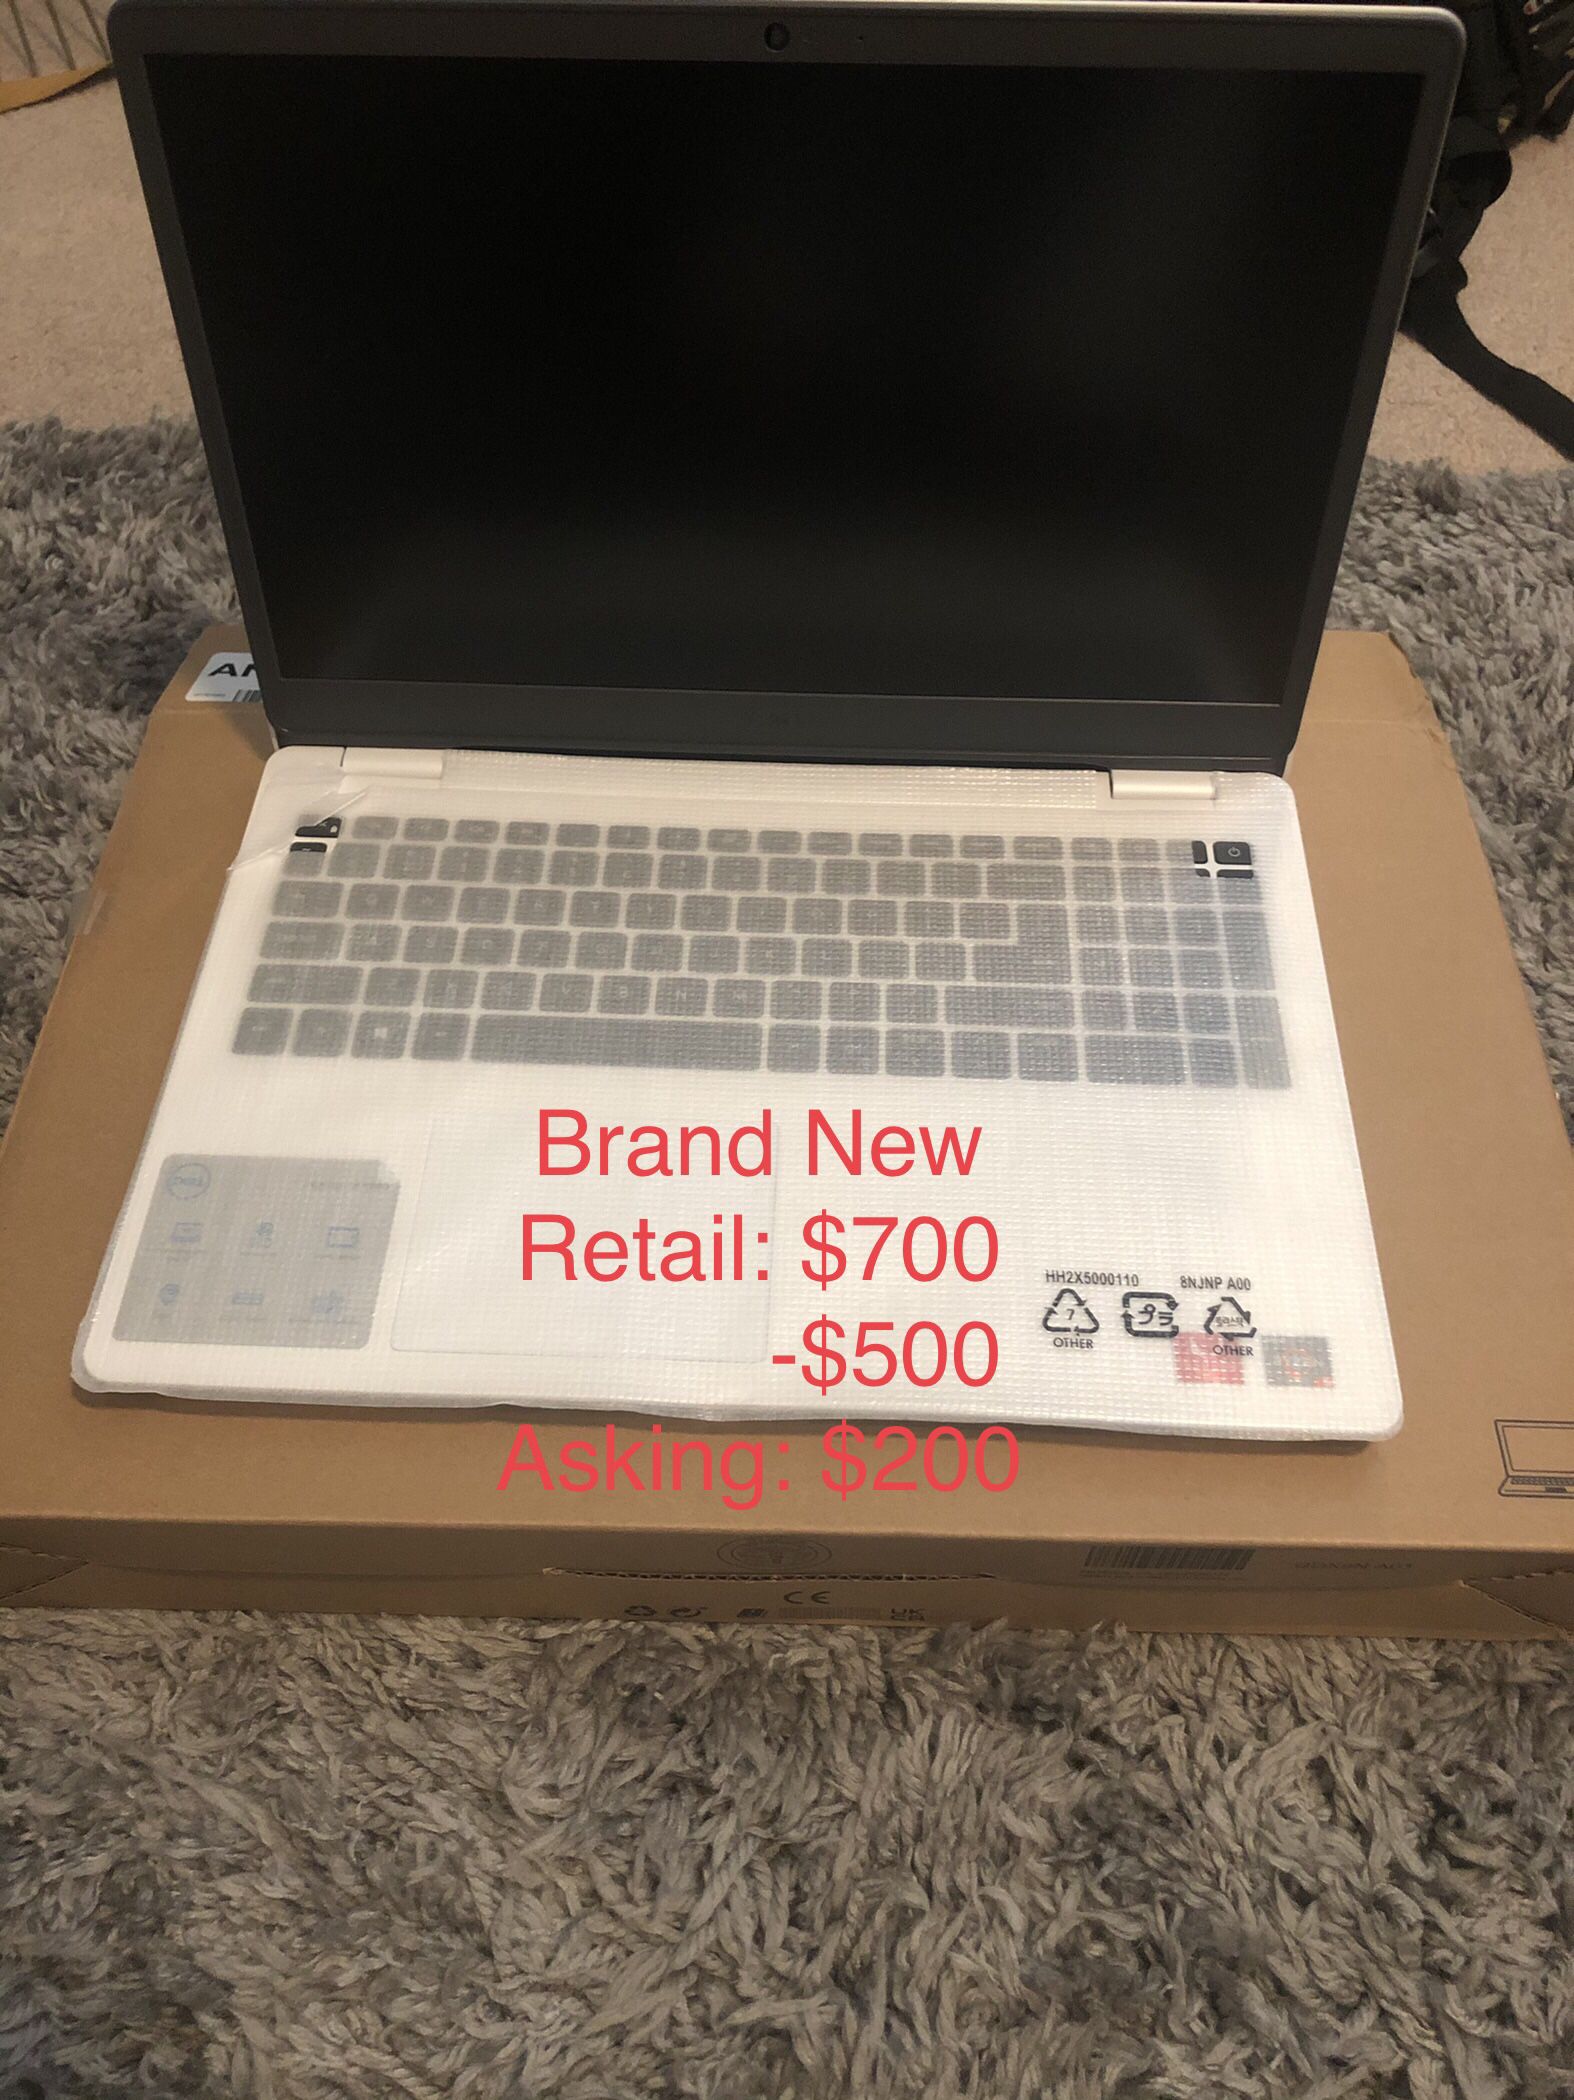 Brand New Dell Inspiron 3000 Laptop